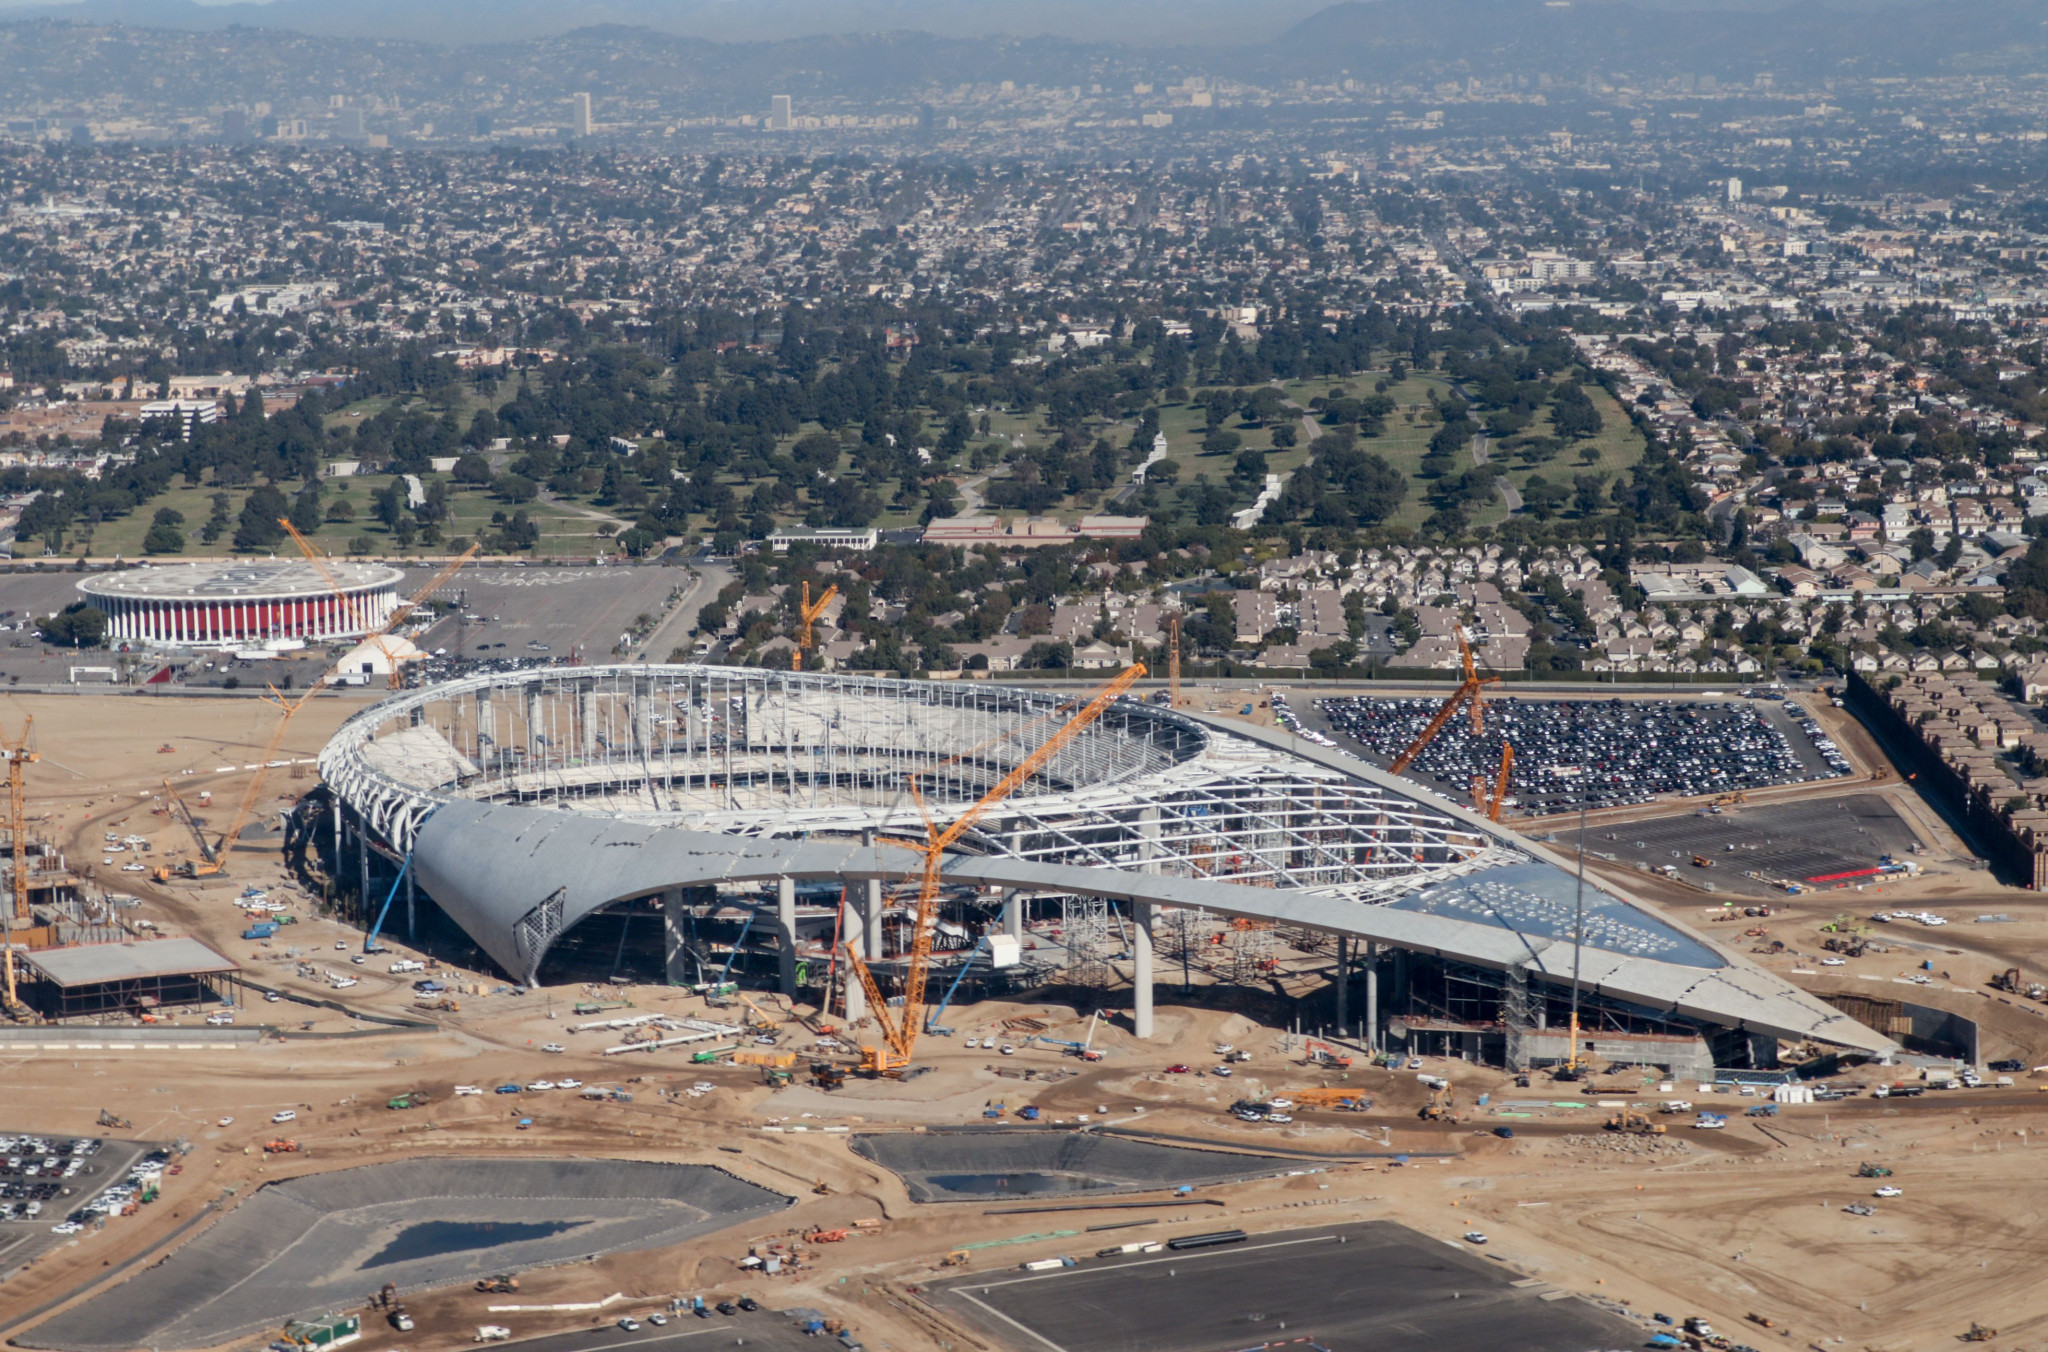 SoFi Stadium, due to host the Opening and Closing Ceremonies during the 2028 Olympic Games in Los Angeles, has been rated at 85 per cent complete ©Getty Images